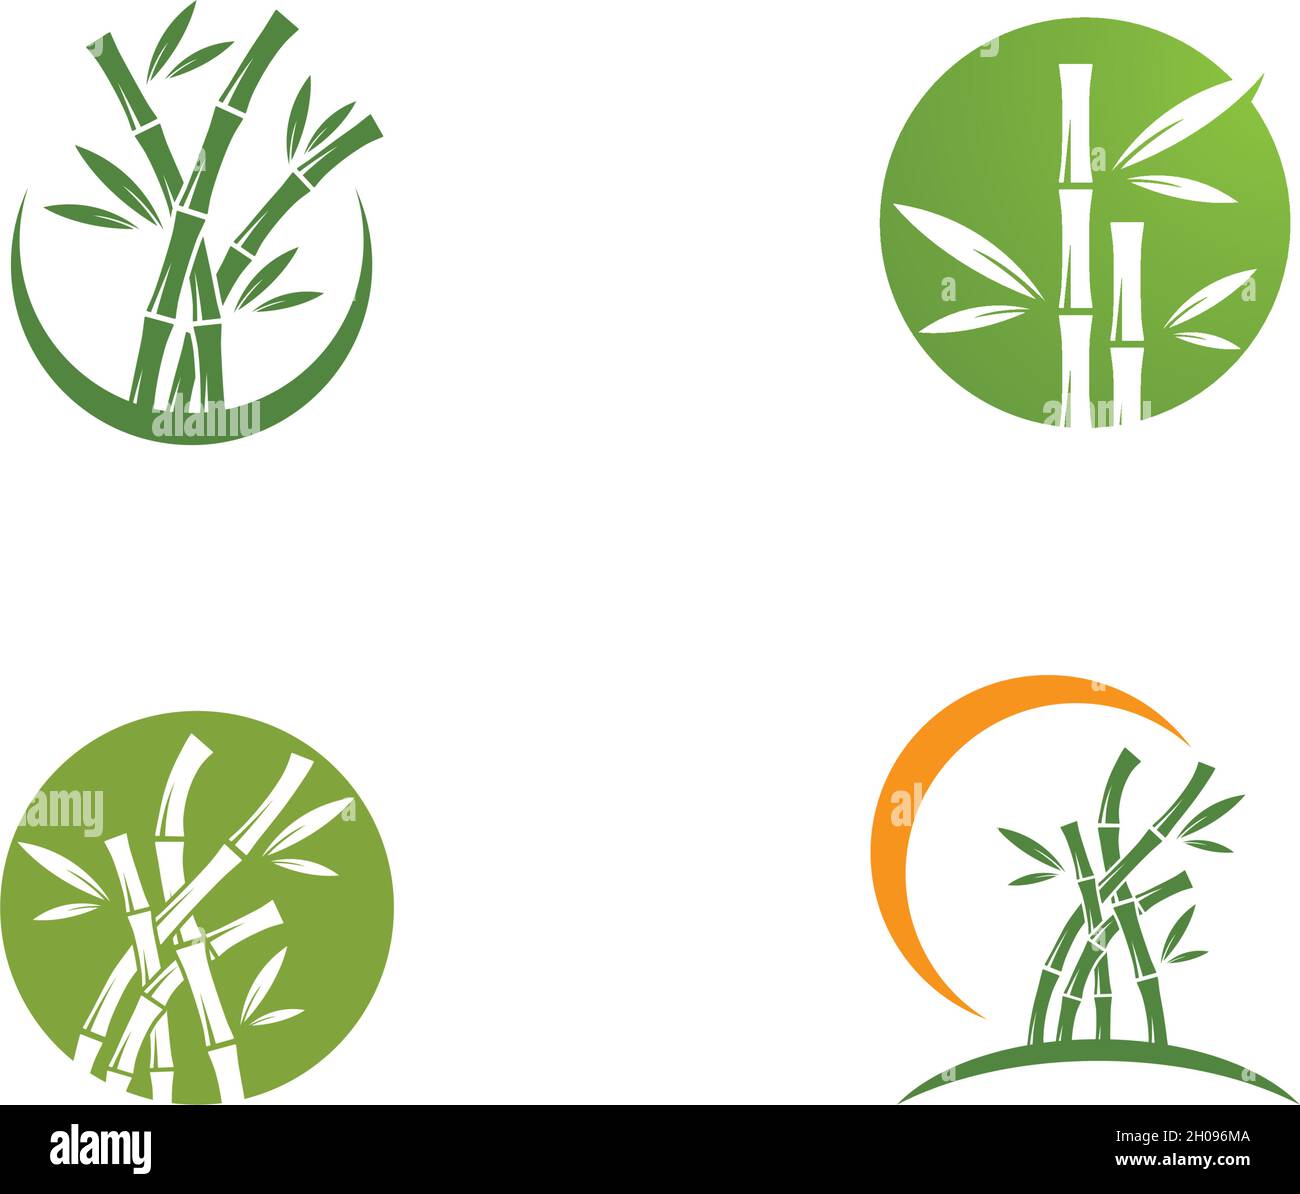 Bamboo with green leaf logo vector icon template Stock Vector